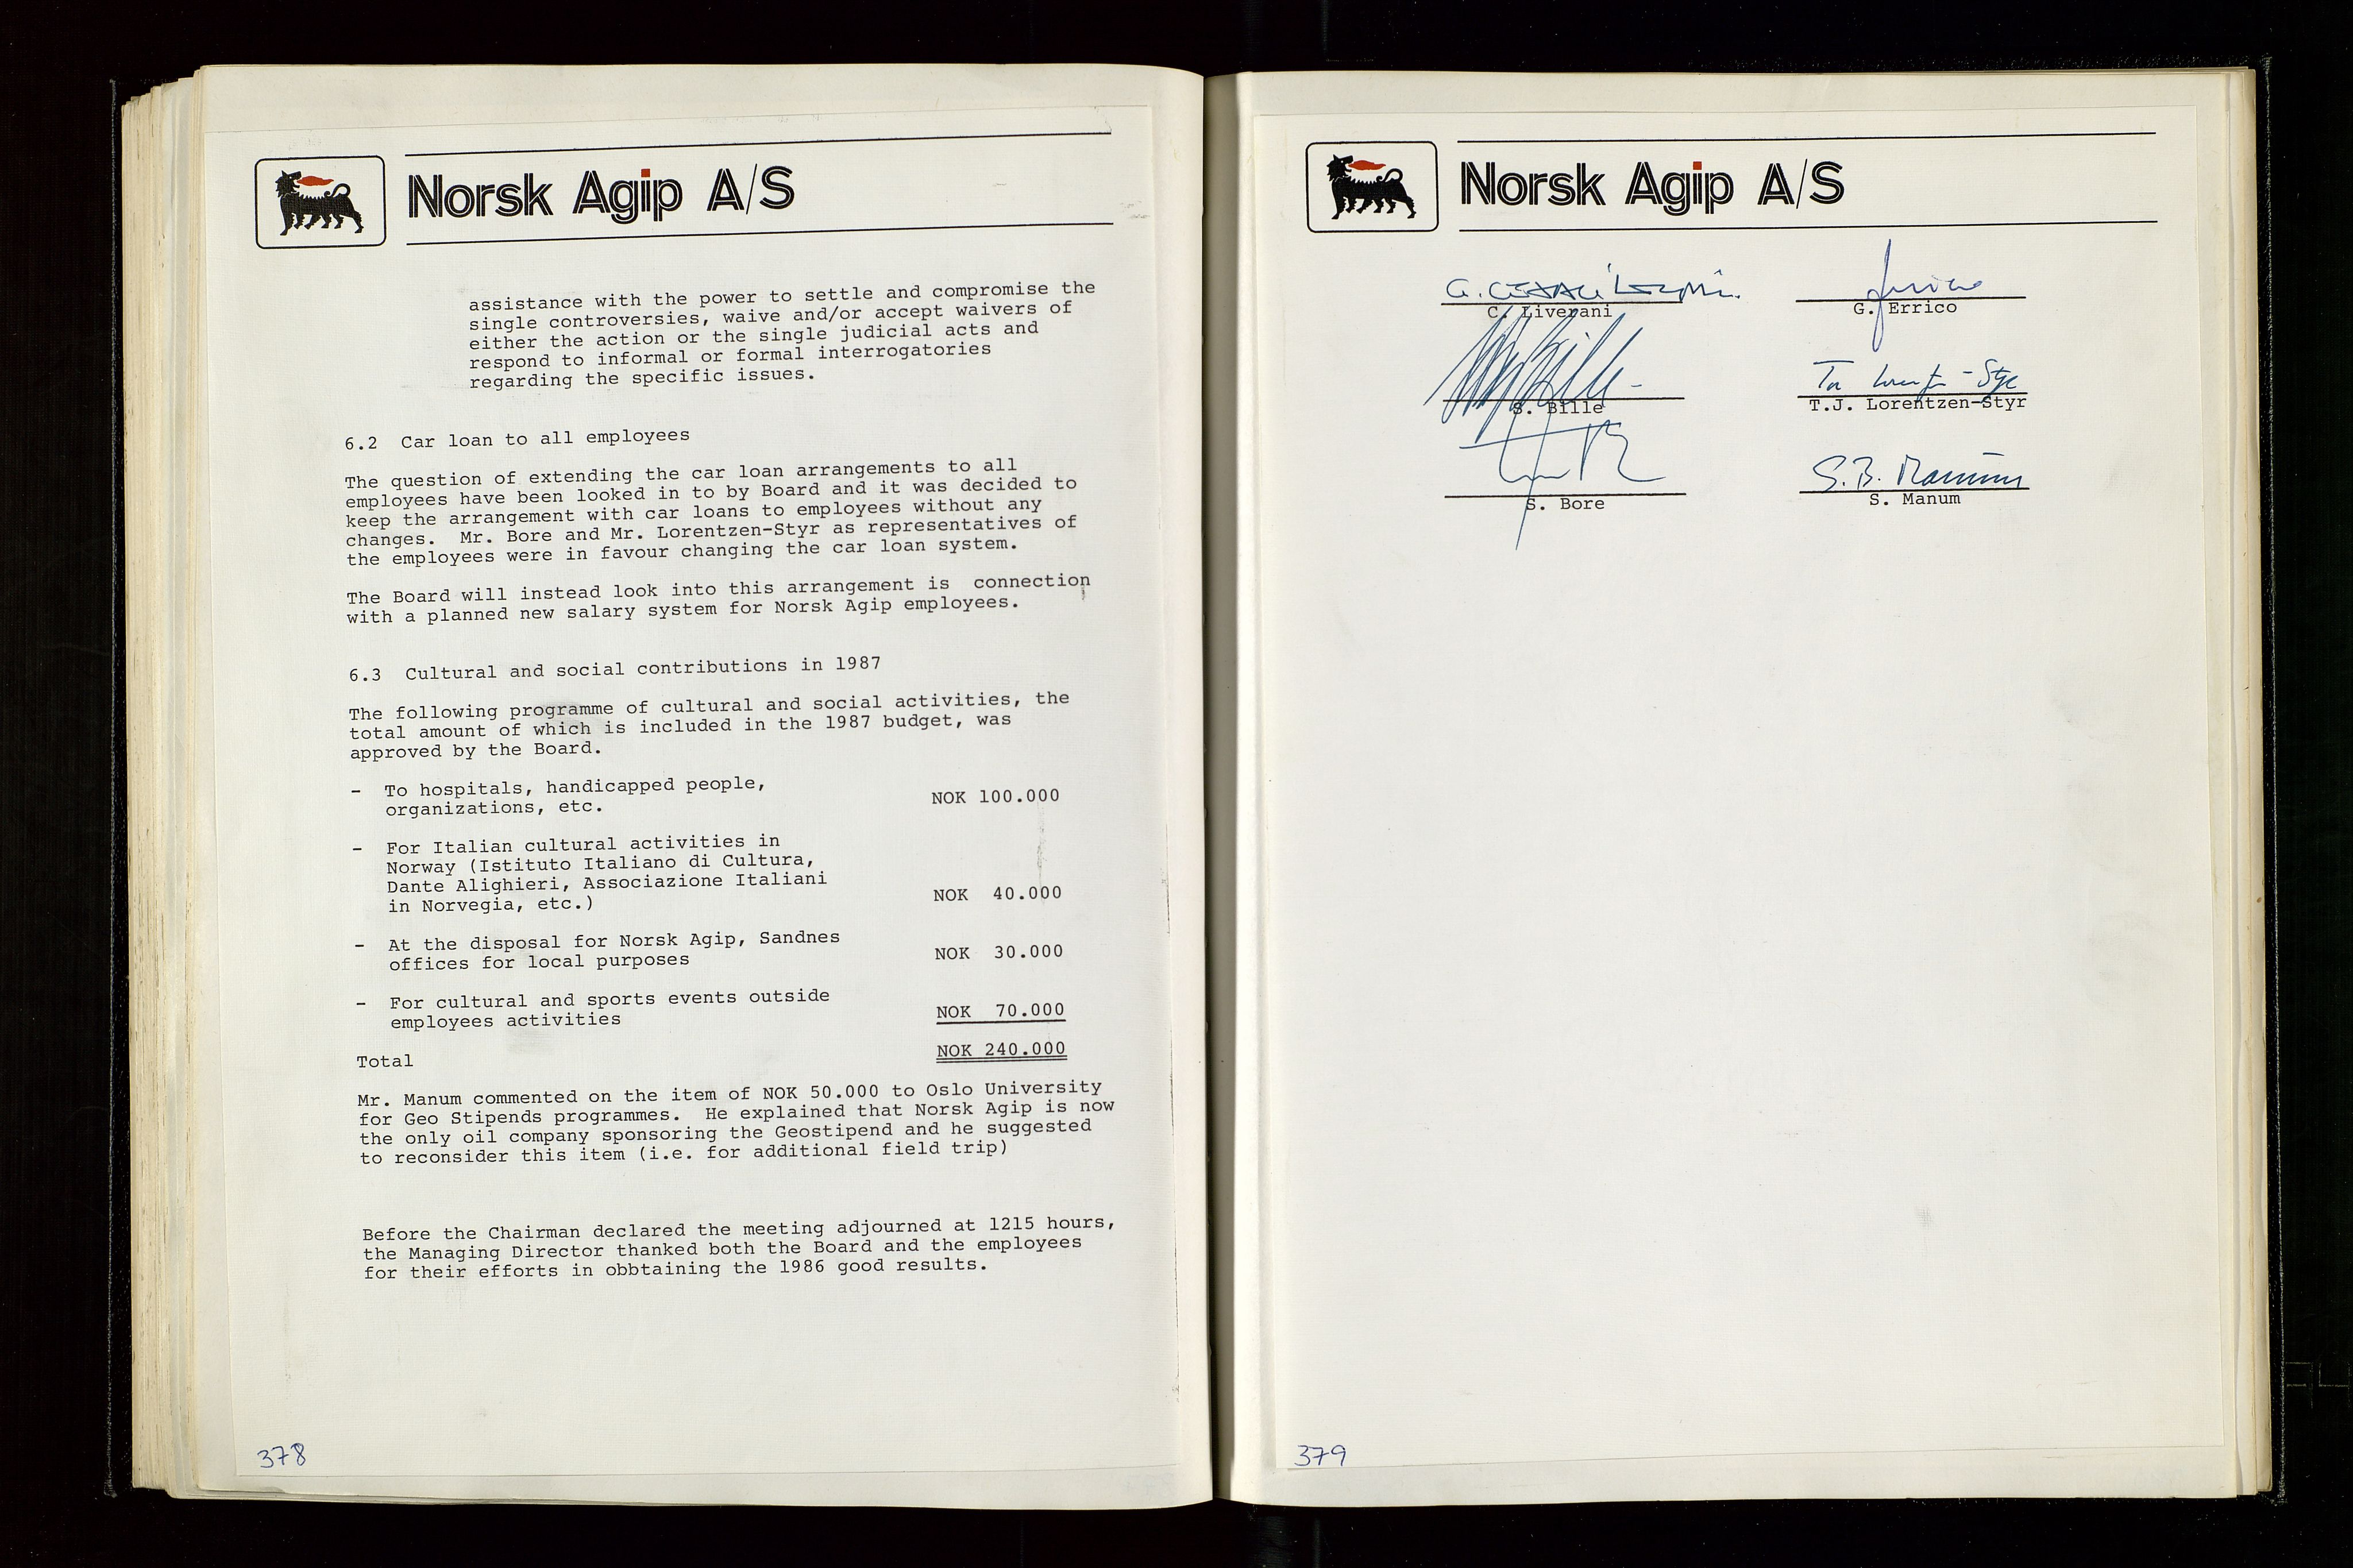 Pa 1583 - Norsk Agip AS, SAST/A-102138/A/Aa/L0003: Board of Directors meeting minutes, 1979-1983, s. 378-379